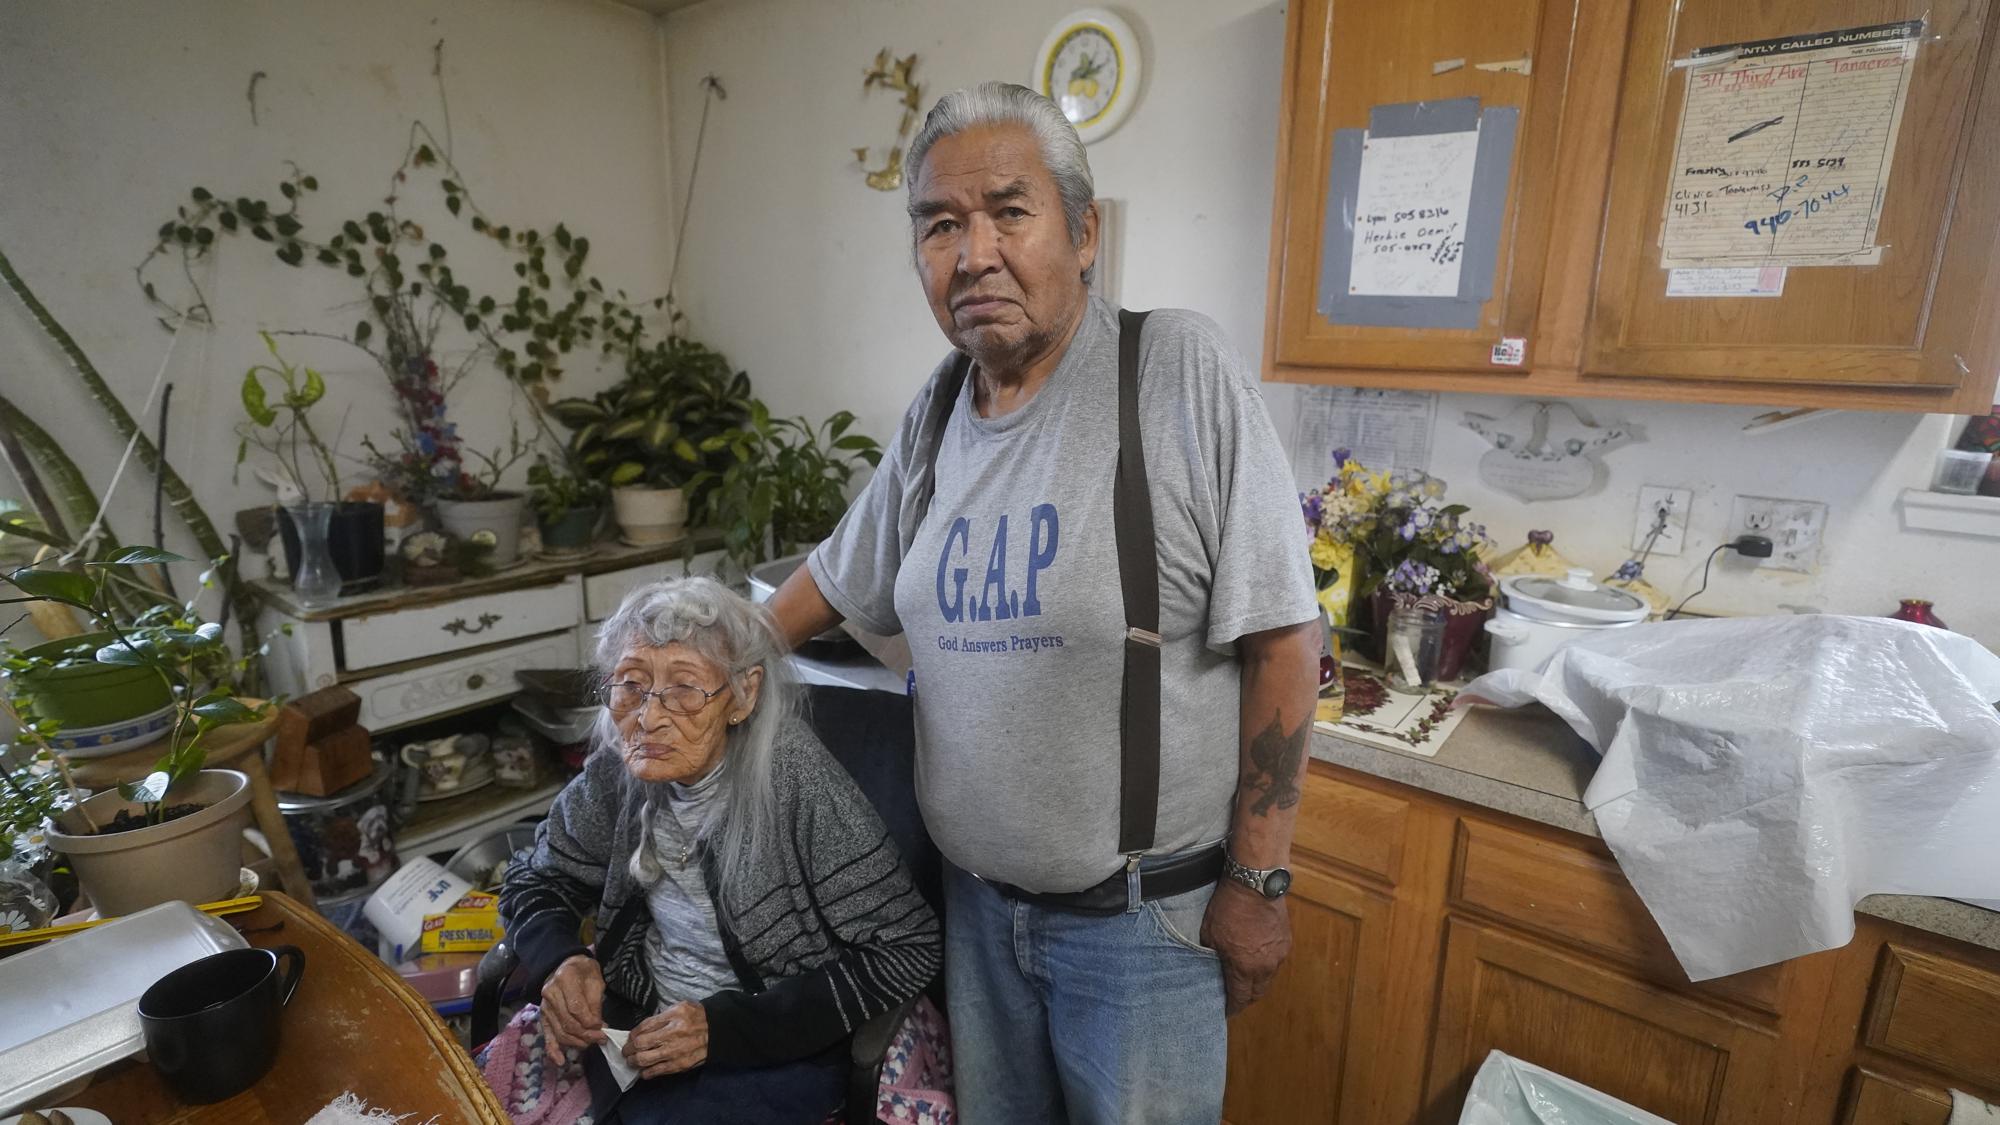 Arthur John, 82, a retired trapper, and his wife of 62 years, 99-year-old Isabel pose for a photograph at their home Thursday, Sept. 23, 2021, in Tanacross, Alaska. Arthur John spent nearly 30 days at in the hospital with COVID, dropping about 40 pounds during his stay. "It makes me weak and can't work like before," the village elder said. "There's so much it took off me and I just wish for working." (AP Photo/Rick Bowmer)